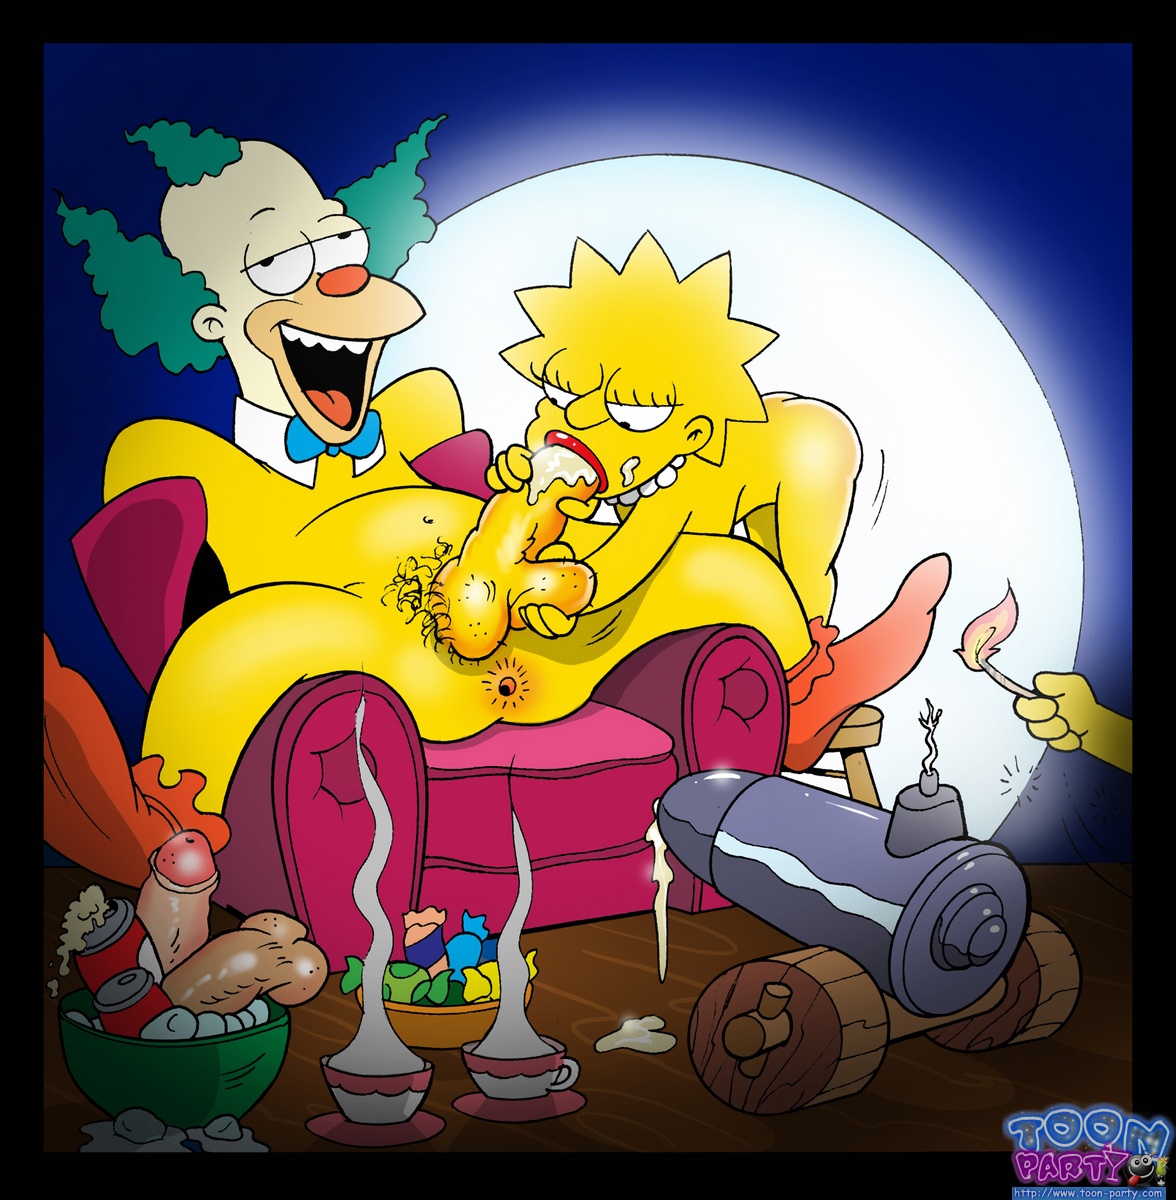 Clown Anime Porn - Krusty the Clown Fucks Marge and Gets a Blowjob from Lisa ...